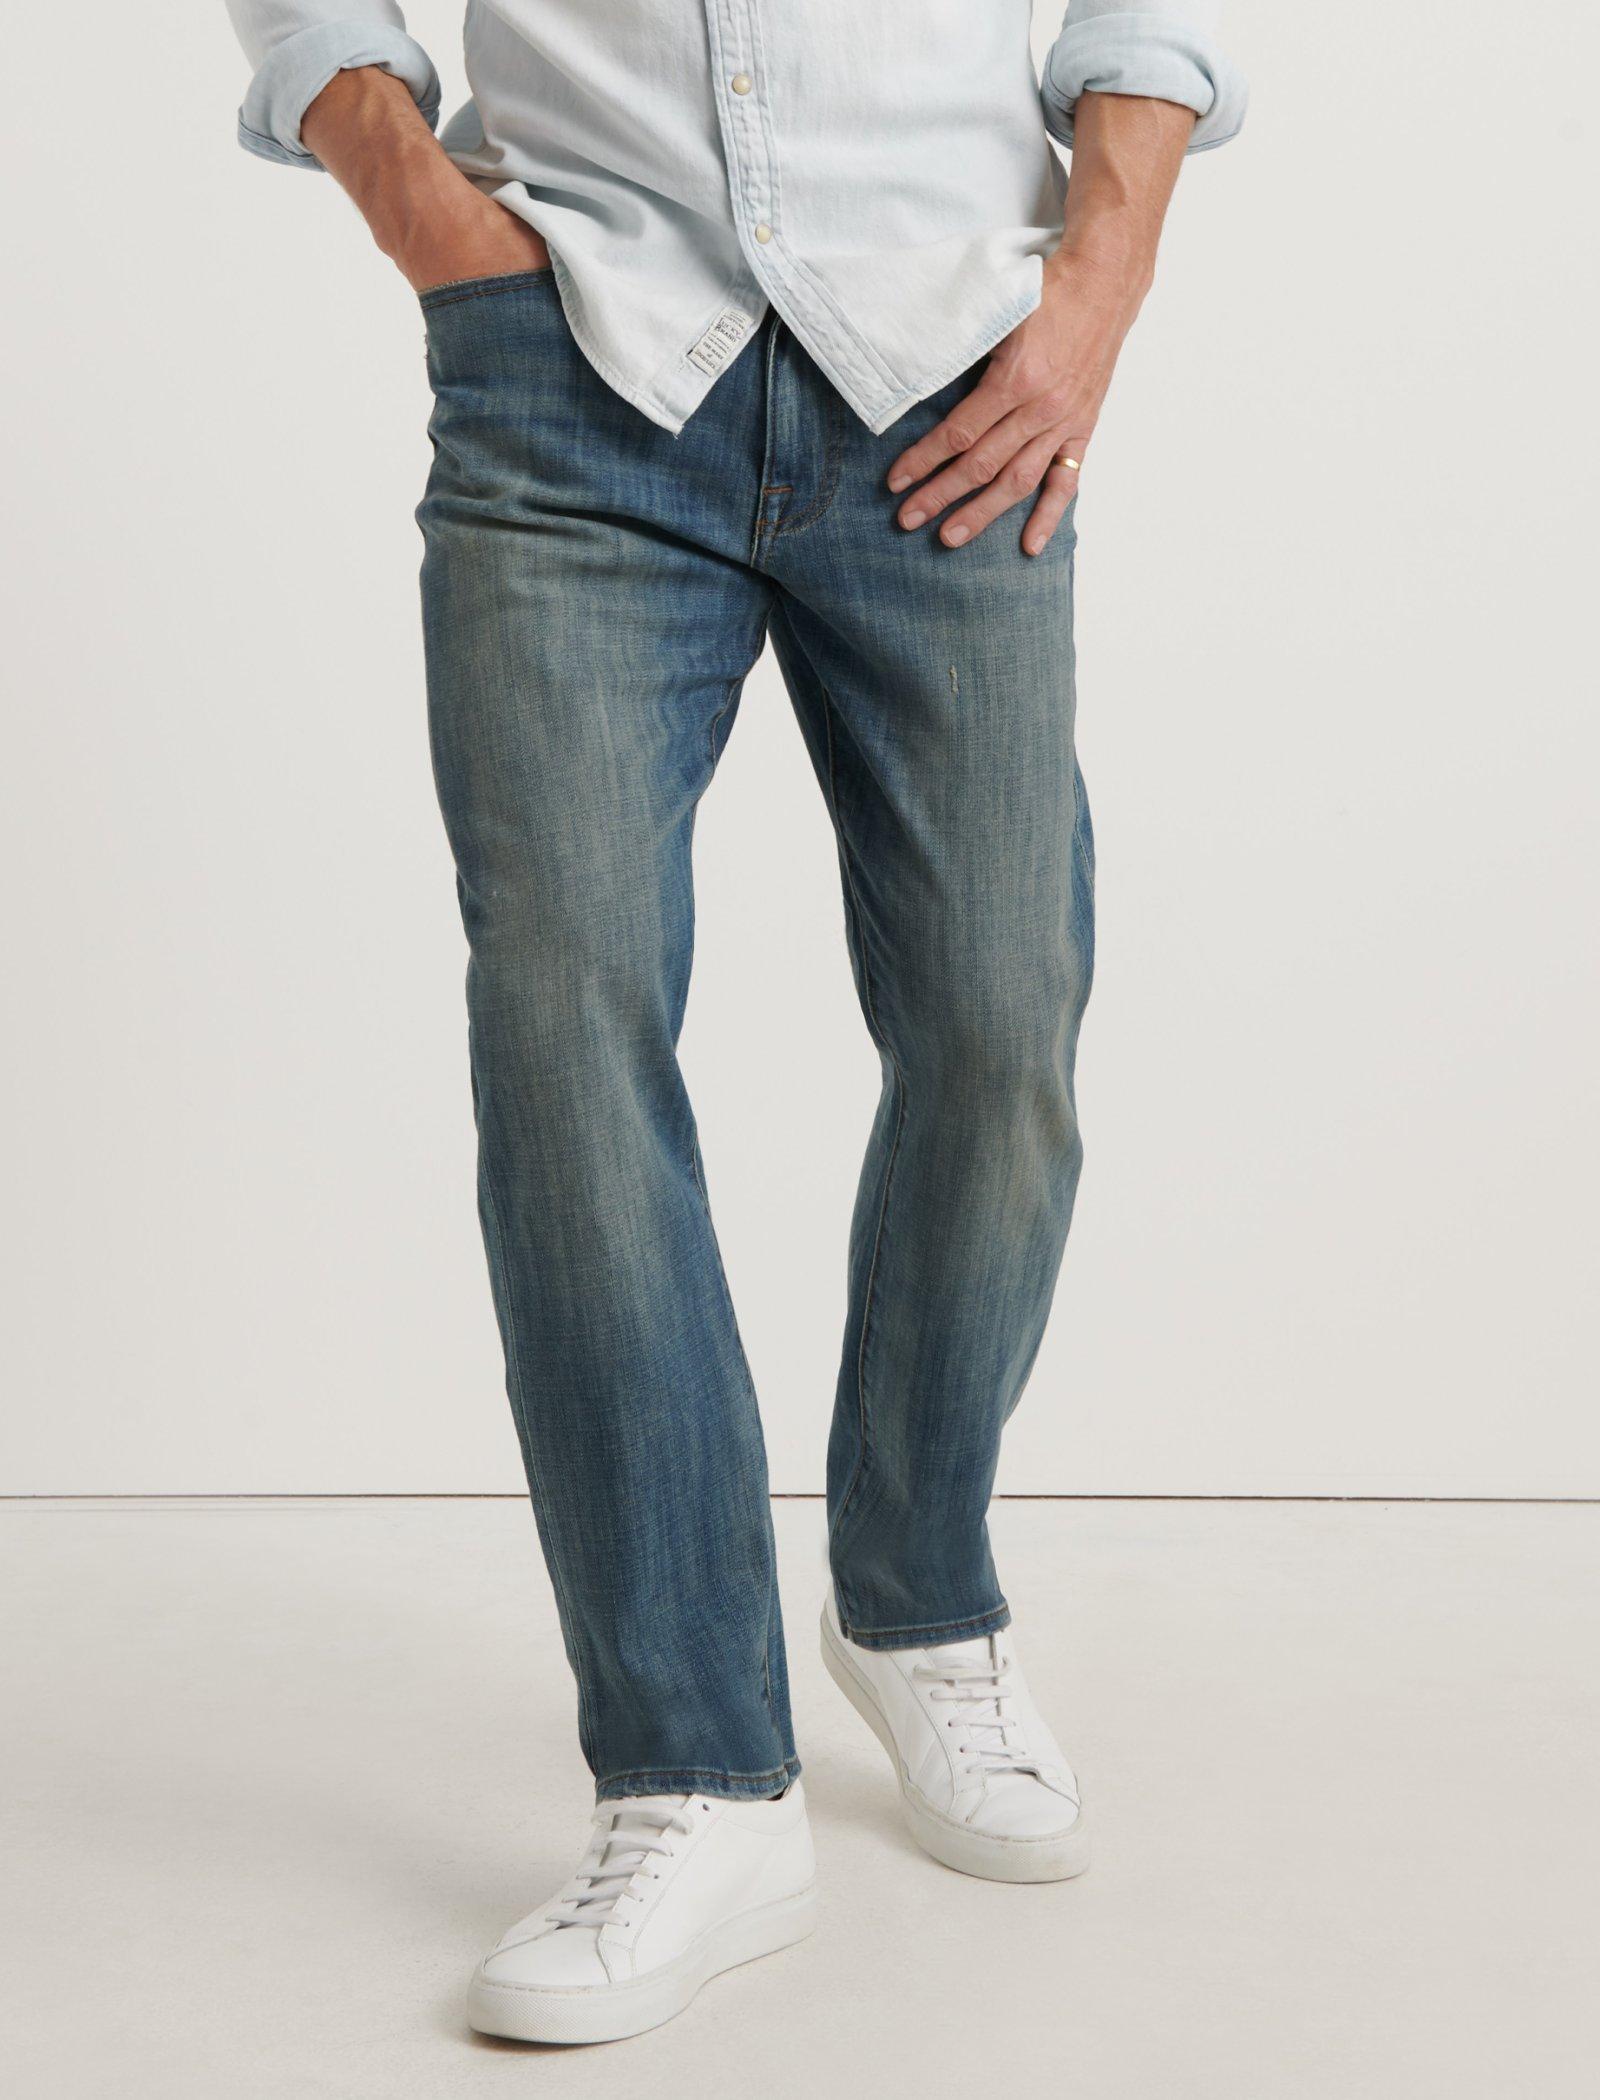 Mens Slim Fit Jeans | Lucky Brand